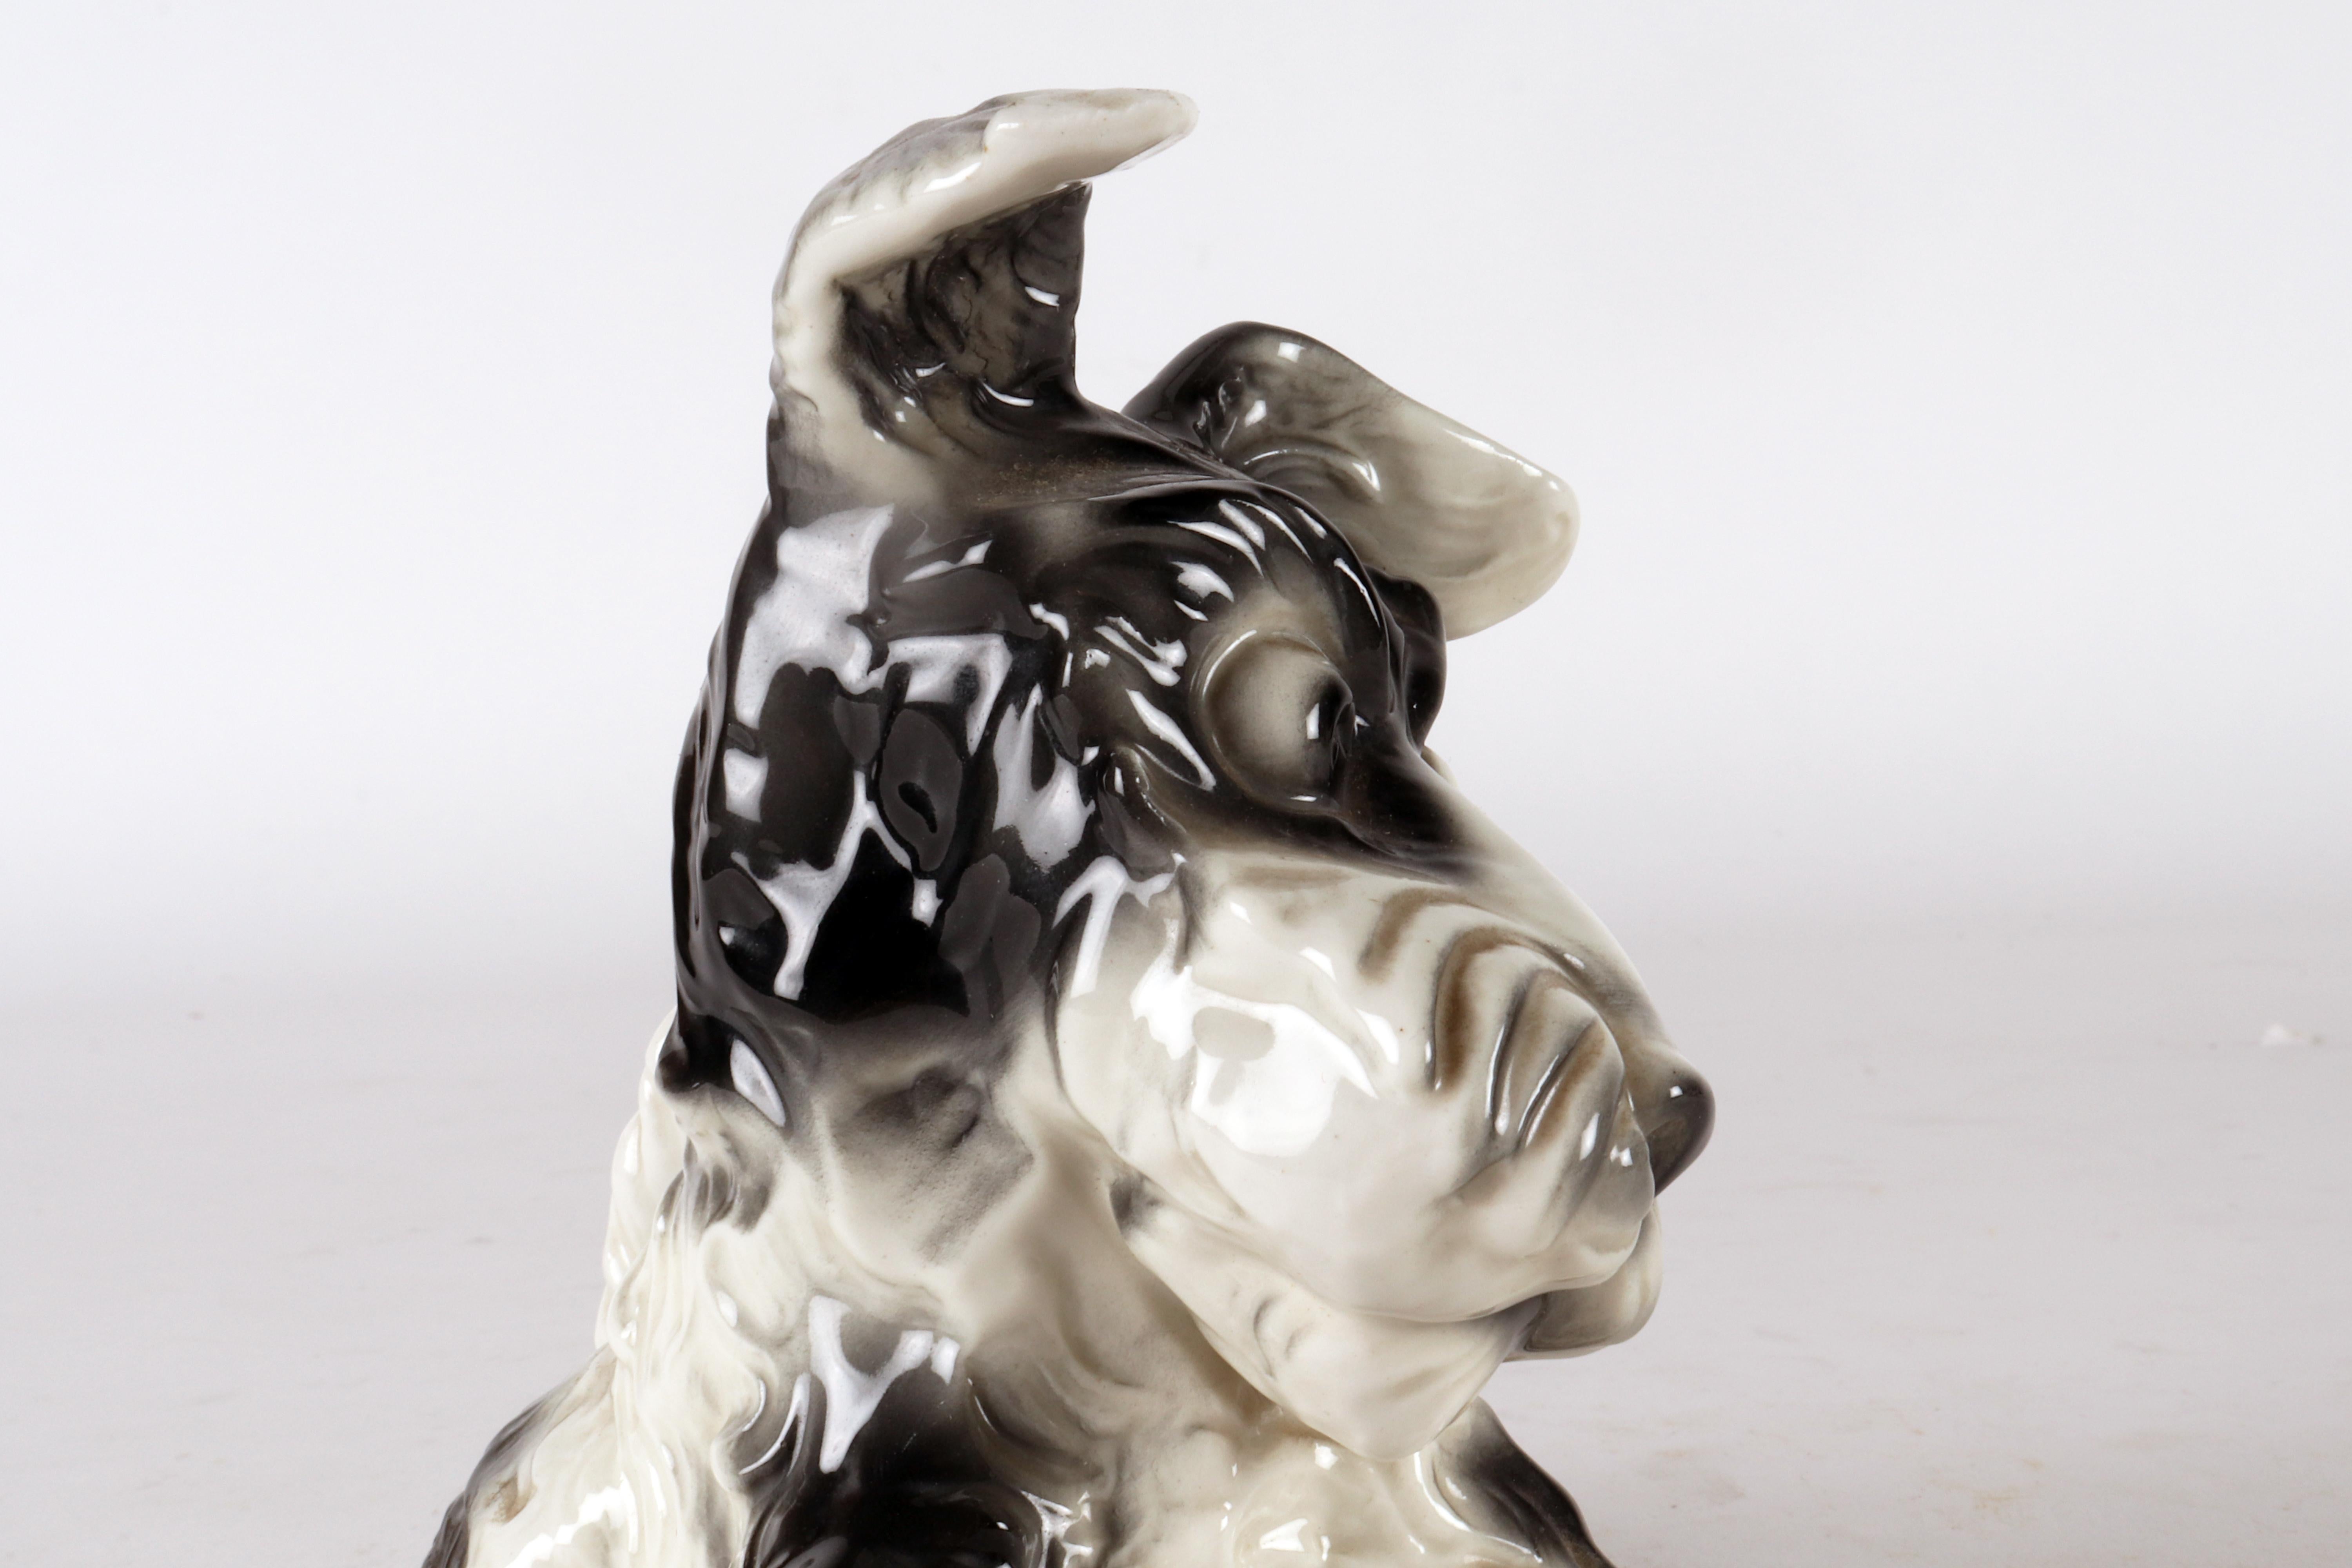 Porcelain sculpture of a Terrier dog, England Thuringia, Germany, 1940 - 1950. For Sale 2